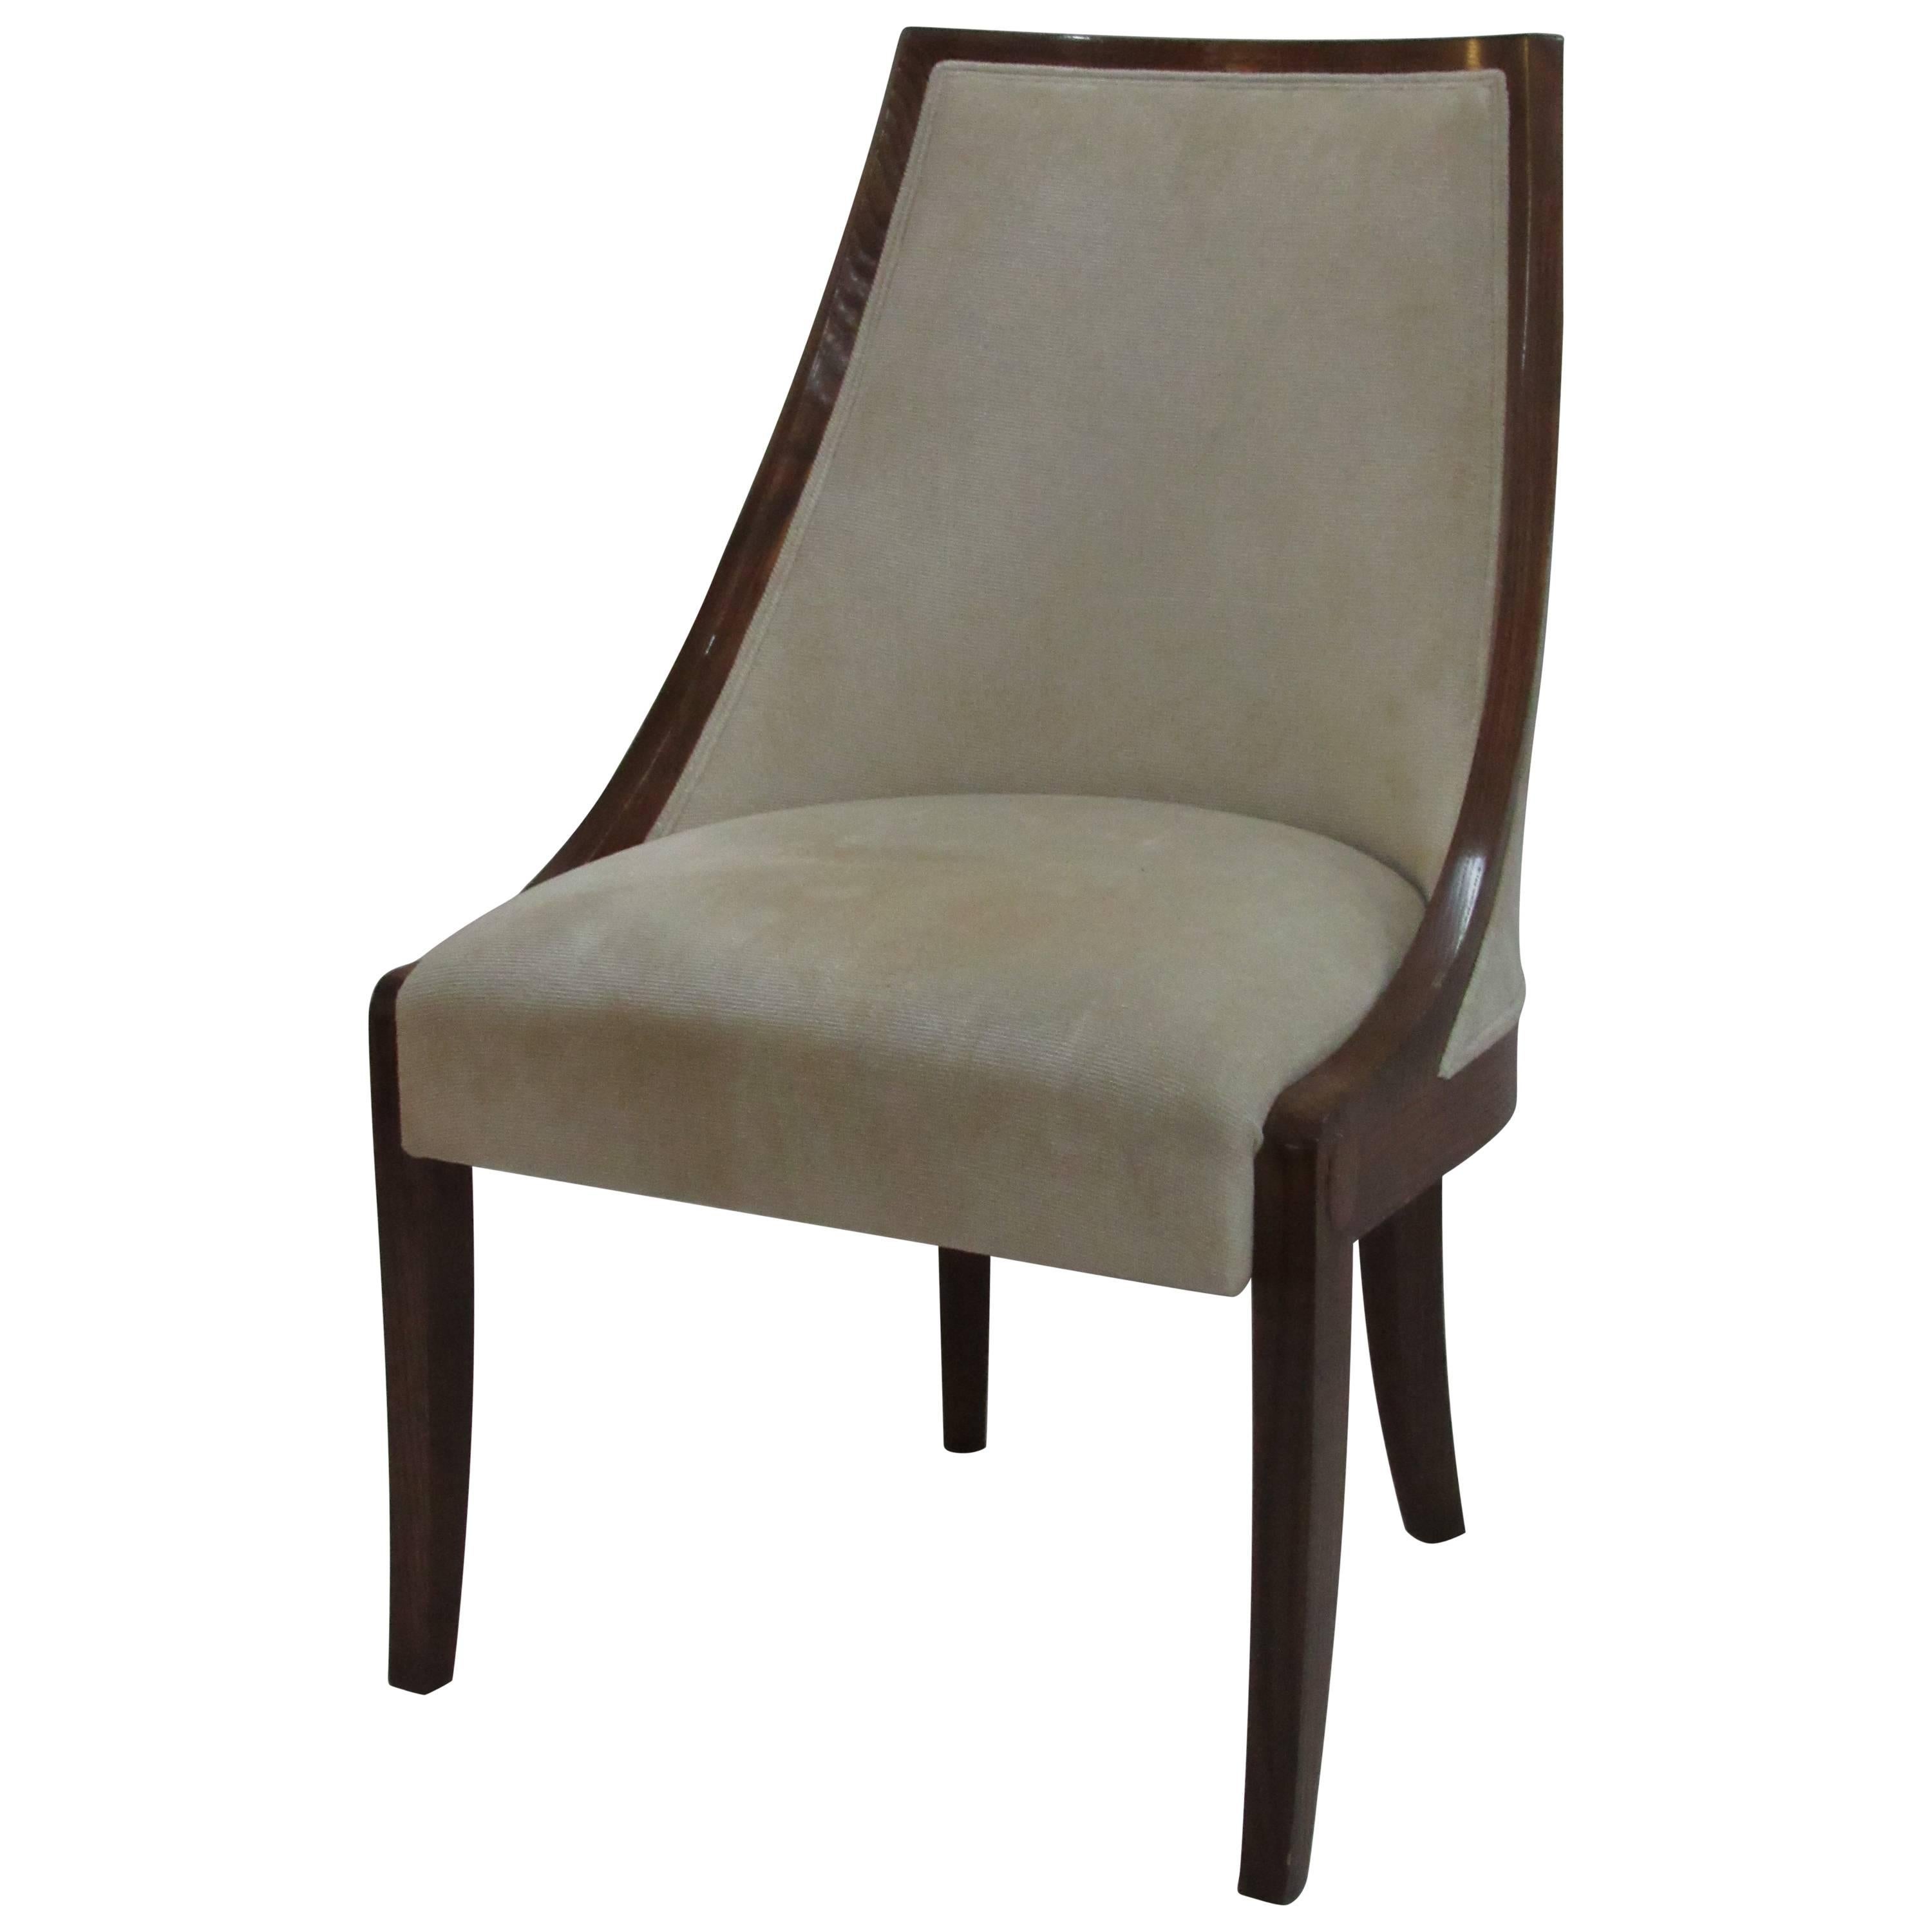 Contemporary Ram's Chair Created by J. Robert Scott Designed by Peter Marino For Sale